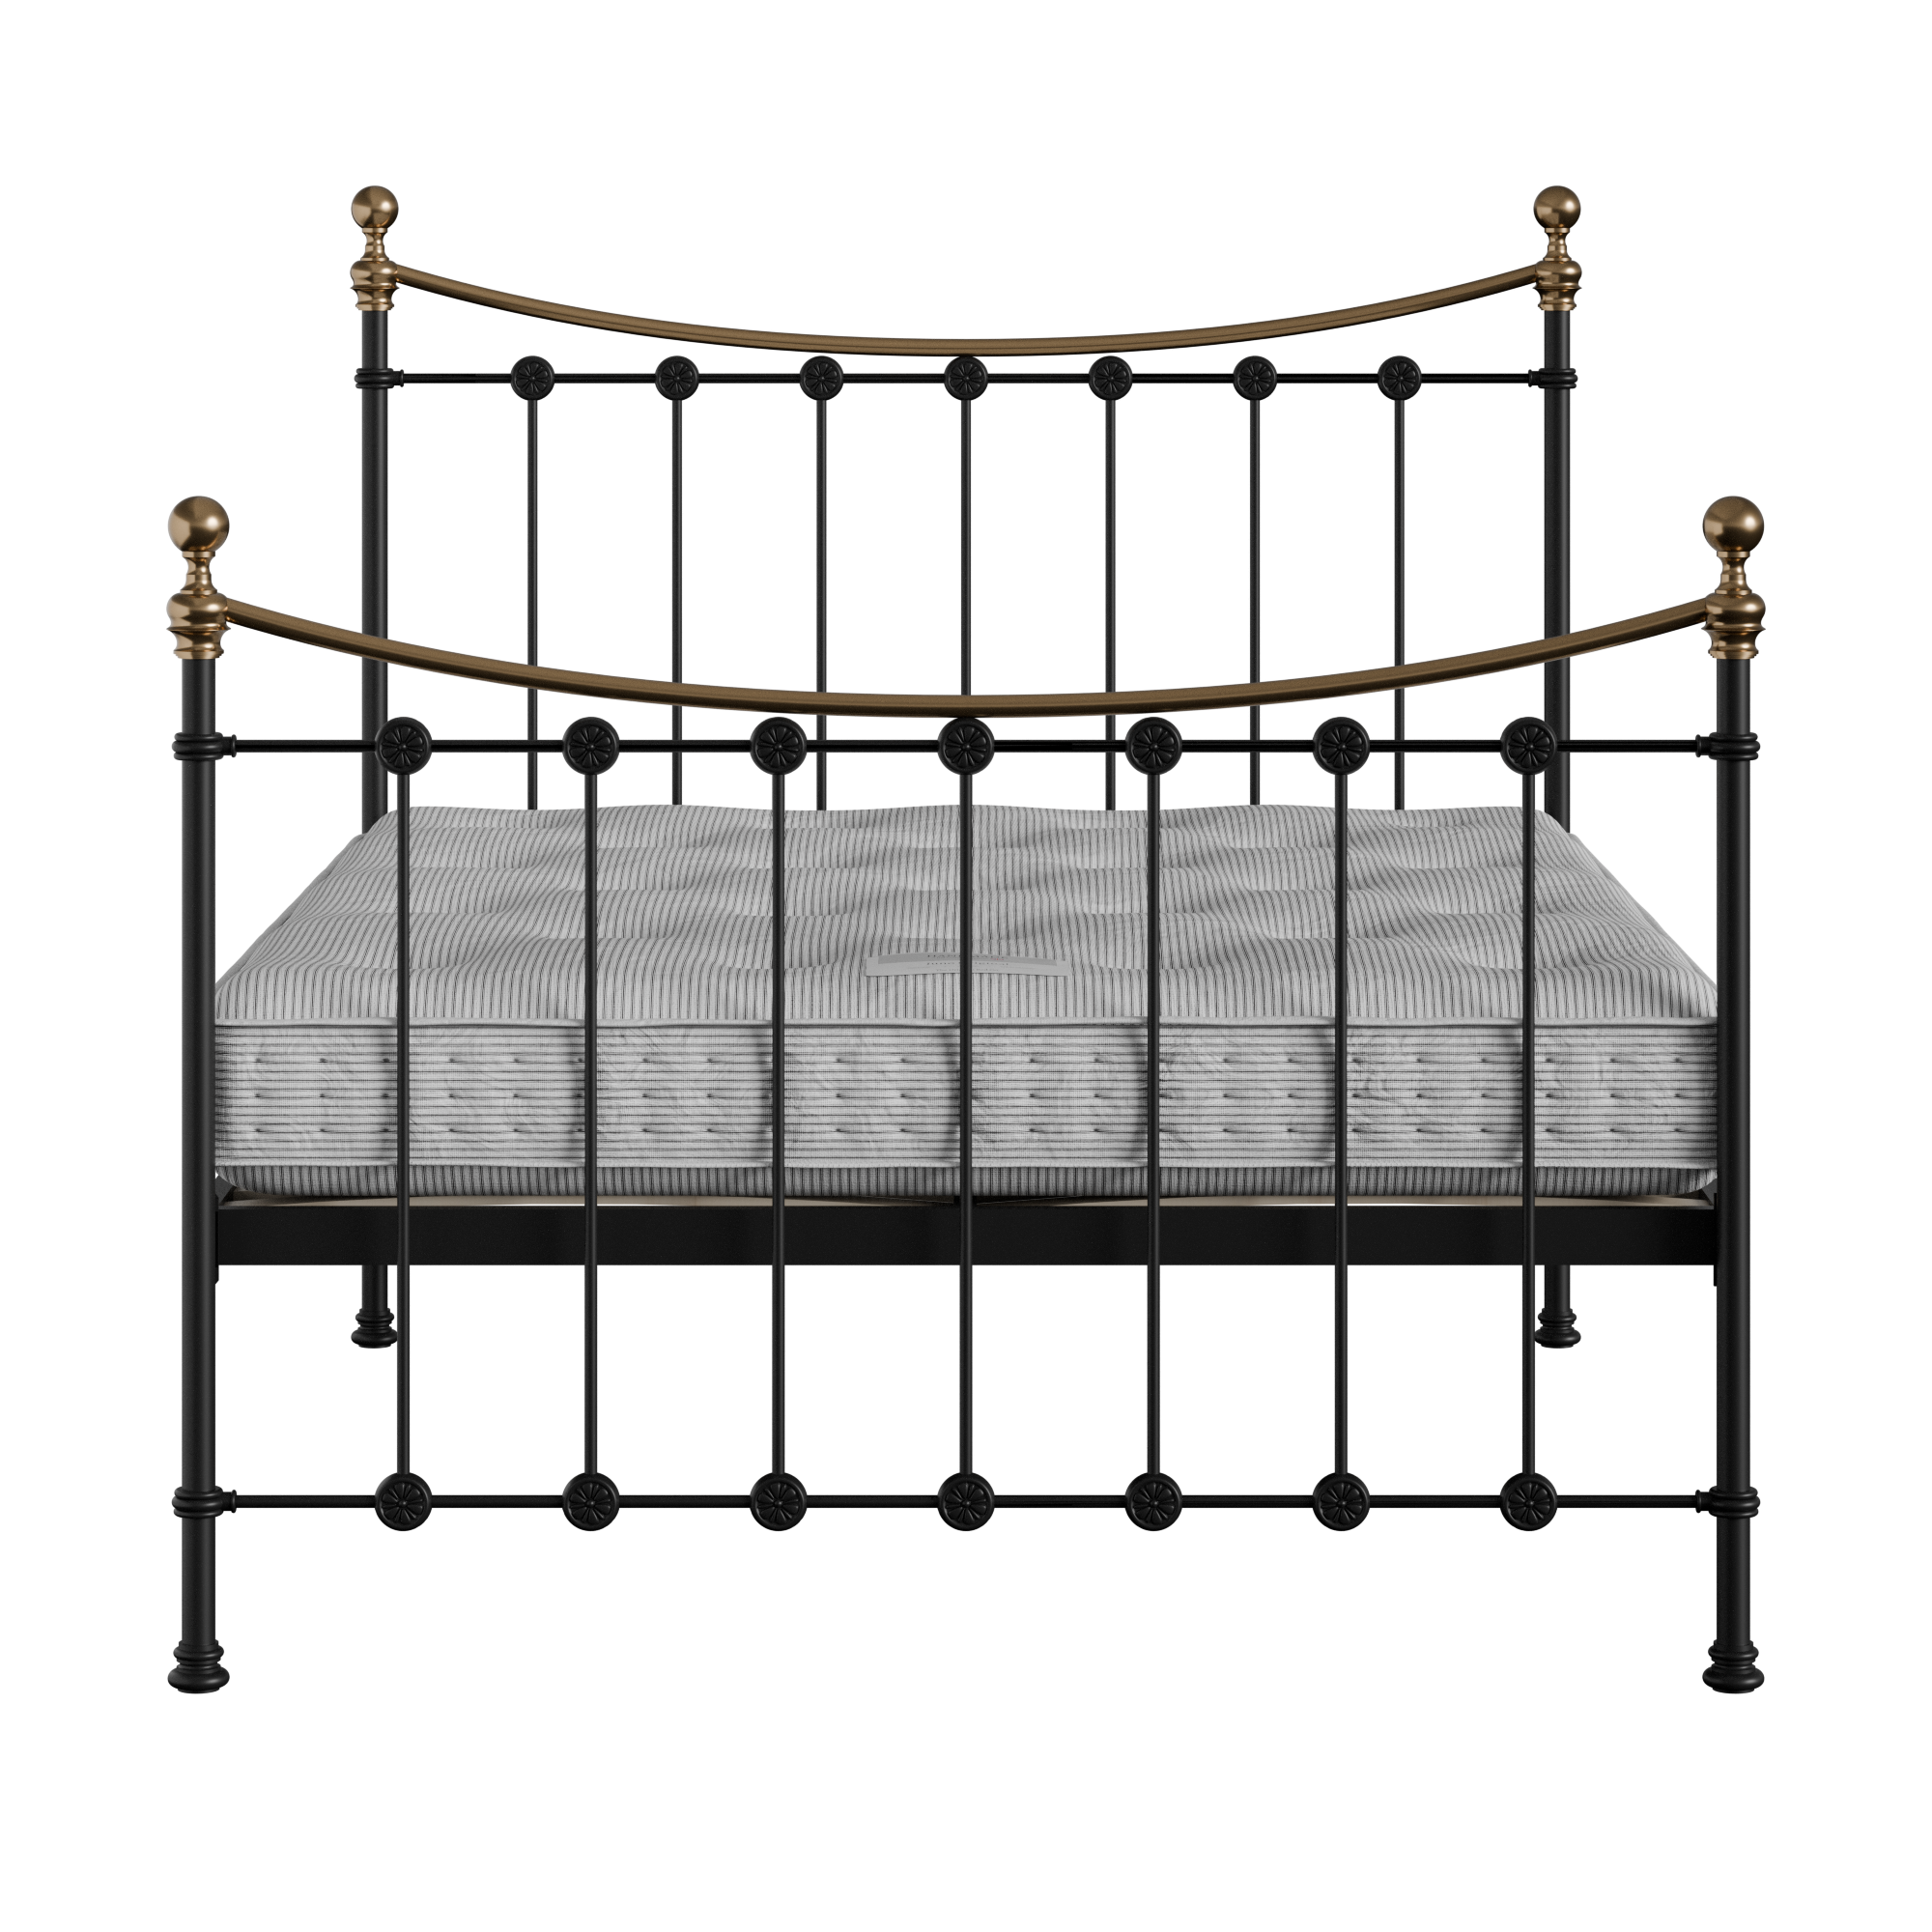 Carrick iron/metal bed in black with Juno mattress